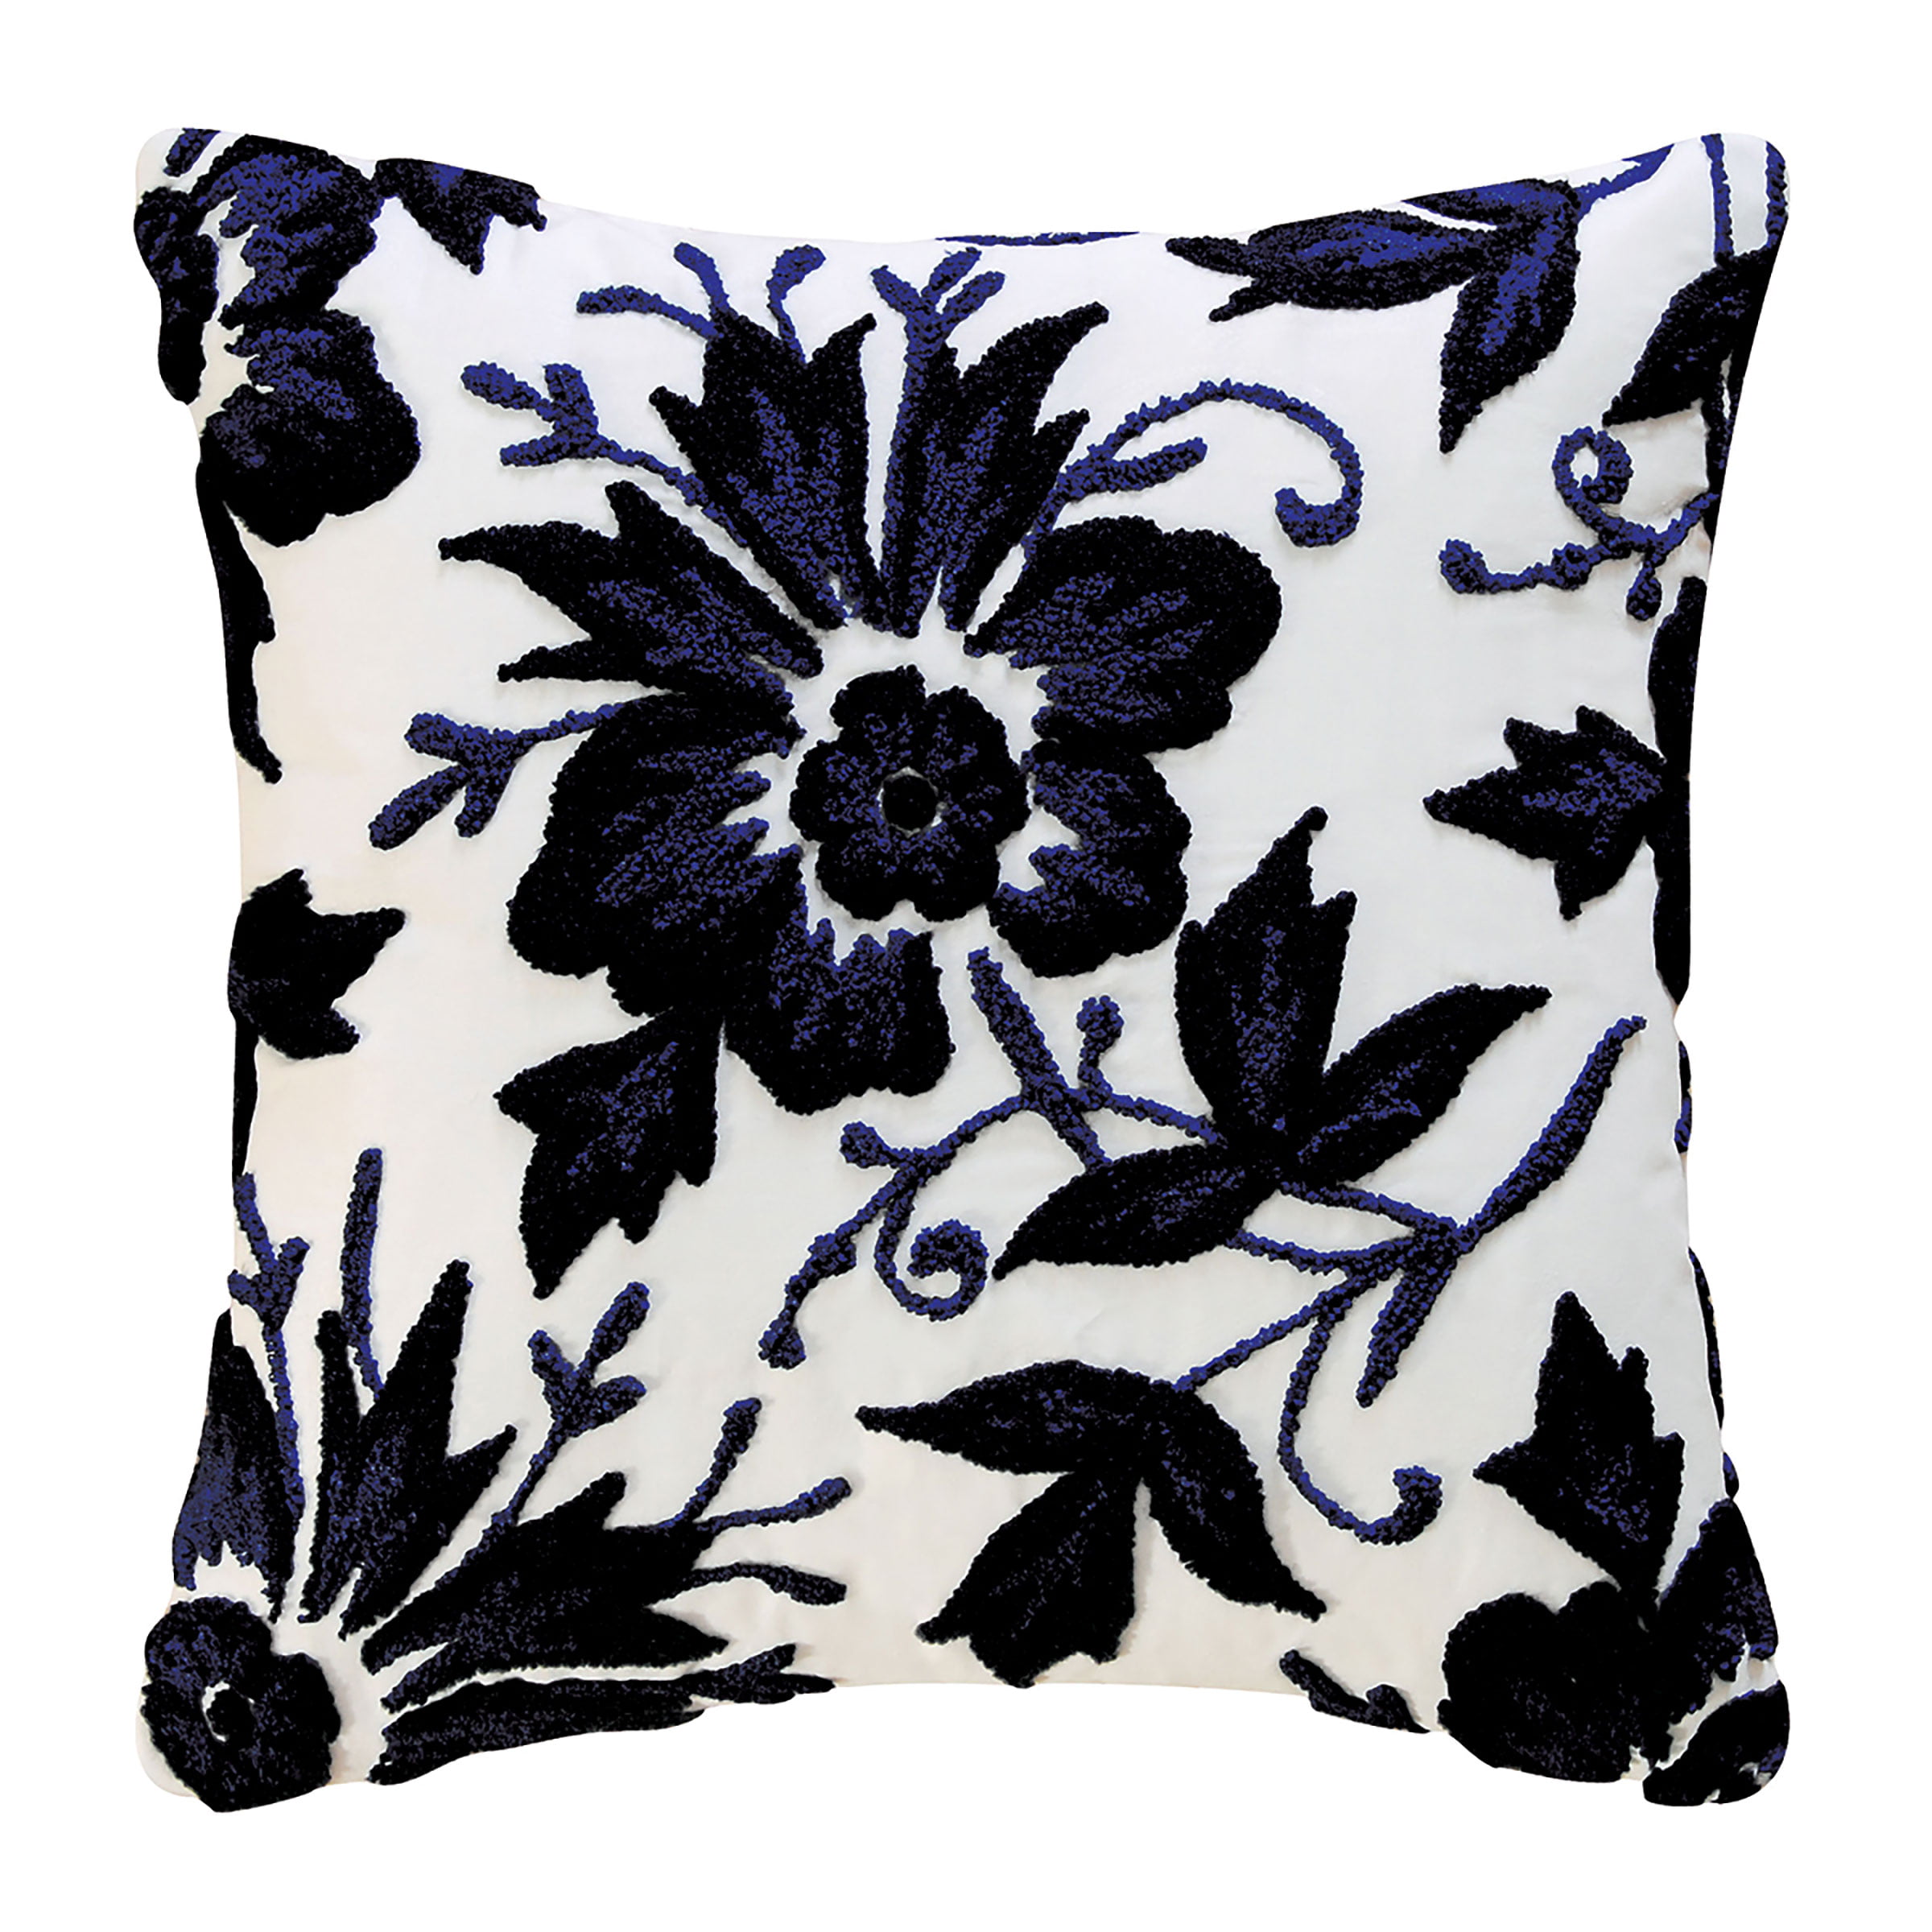 16 by 16-Inch C&F Home Shells No.3 Tufted Pillow